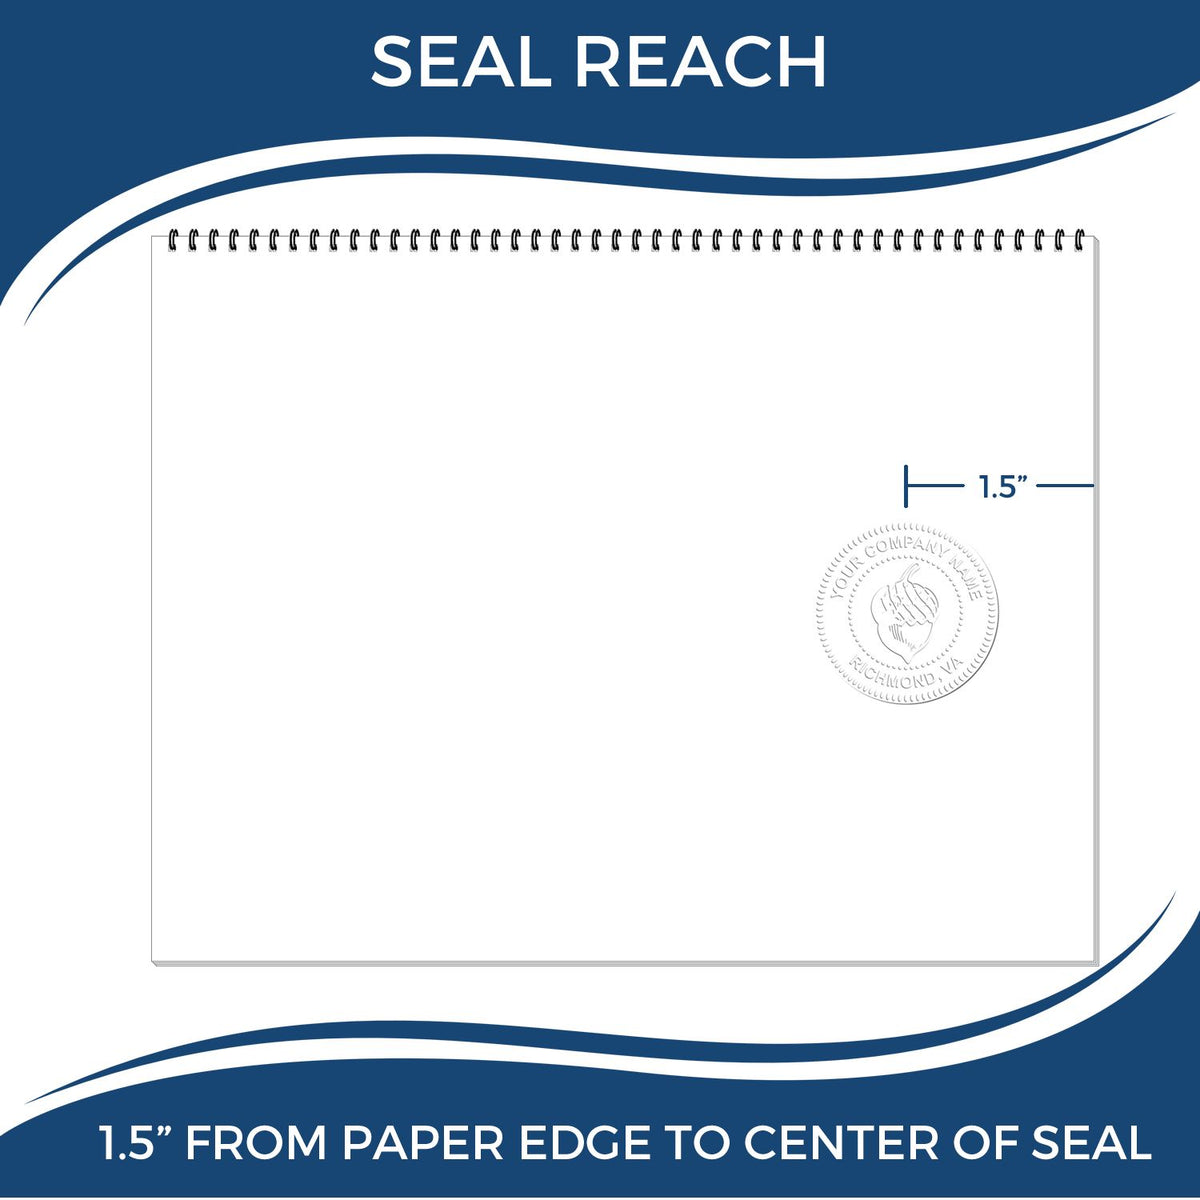 An infographic showing the seal reach which is represented by a ruler and a miniature seal image of the Handheld Georgia Land Surveyor Seal